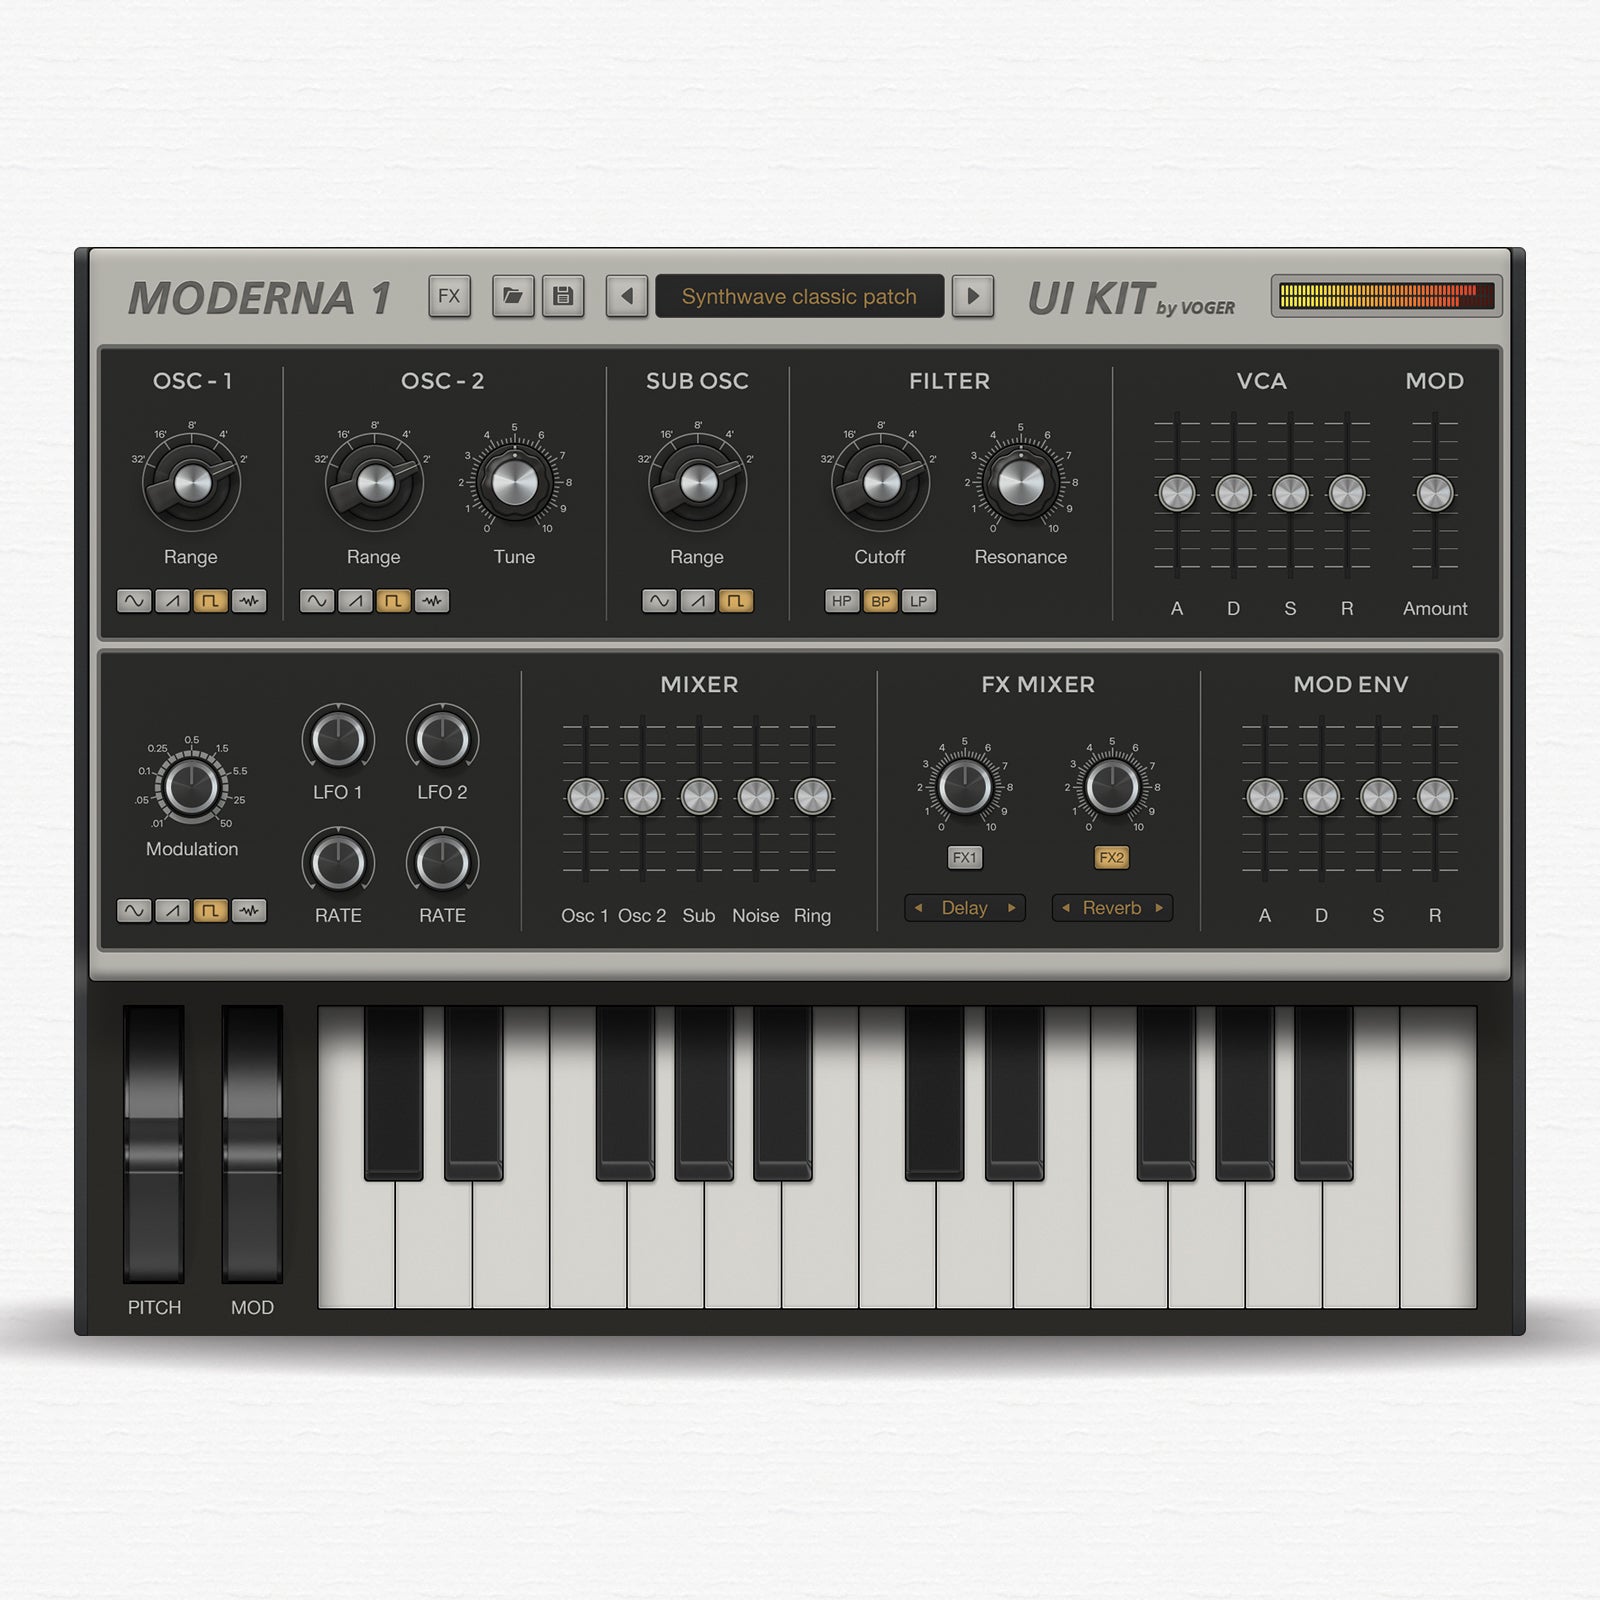 Design synth panel for iPad and iPad Pro